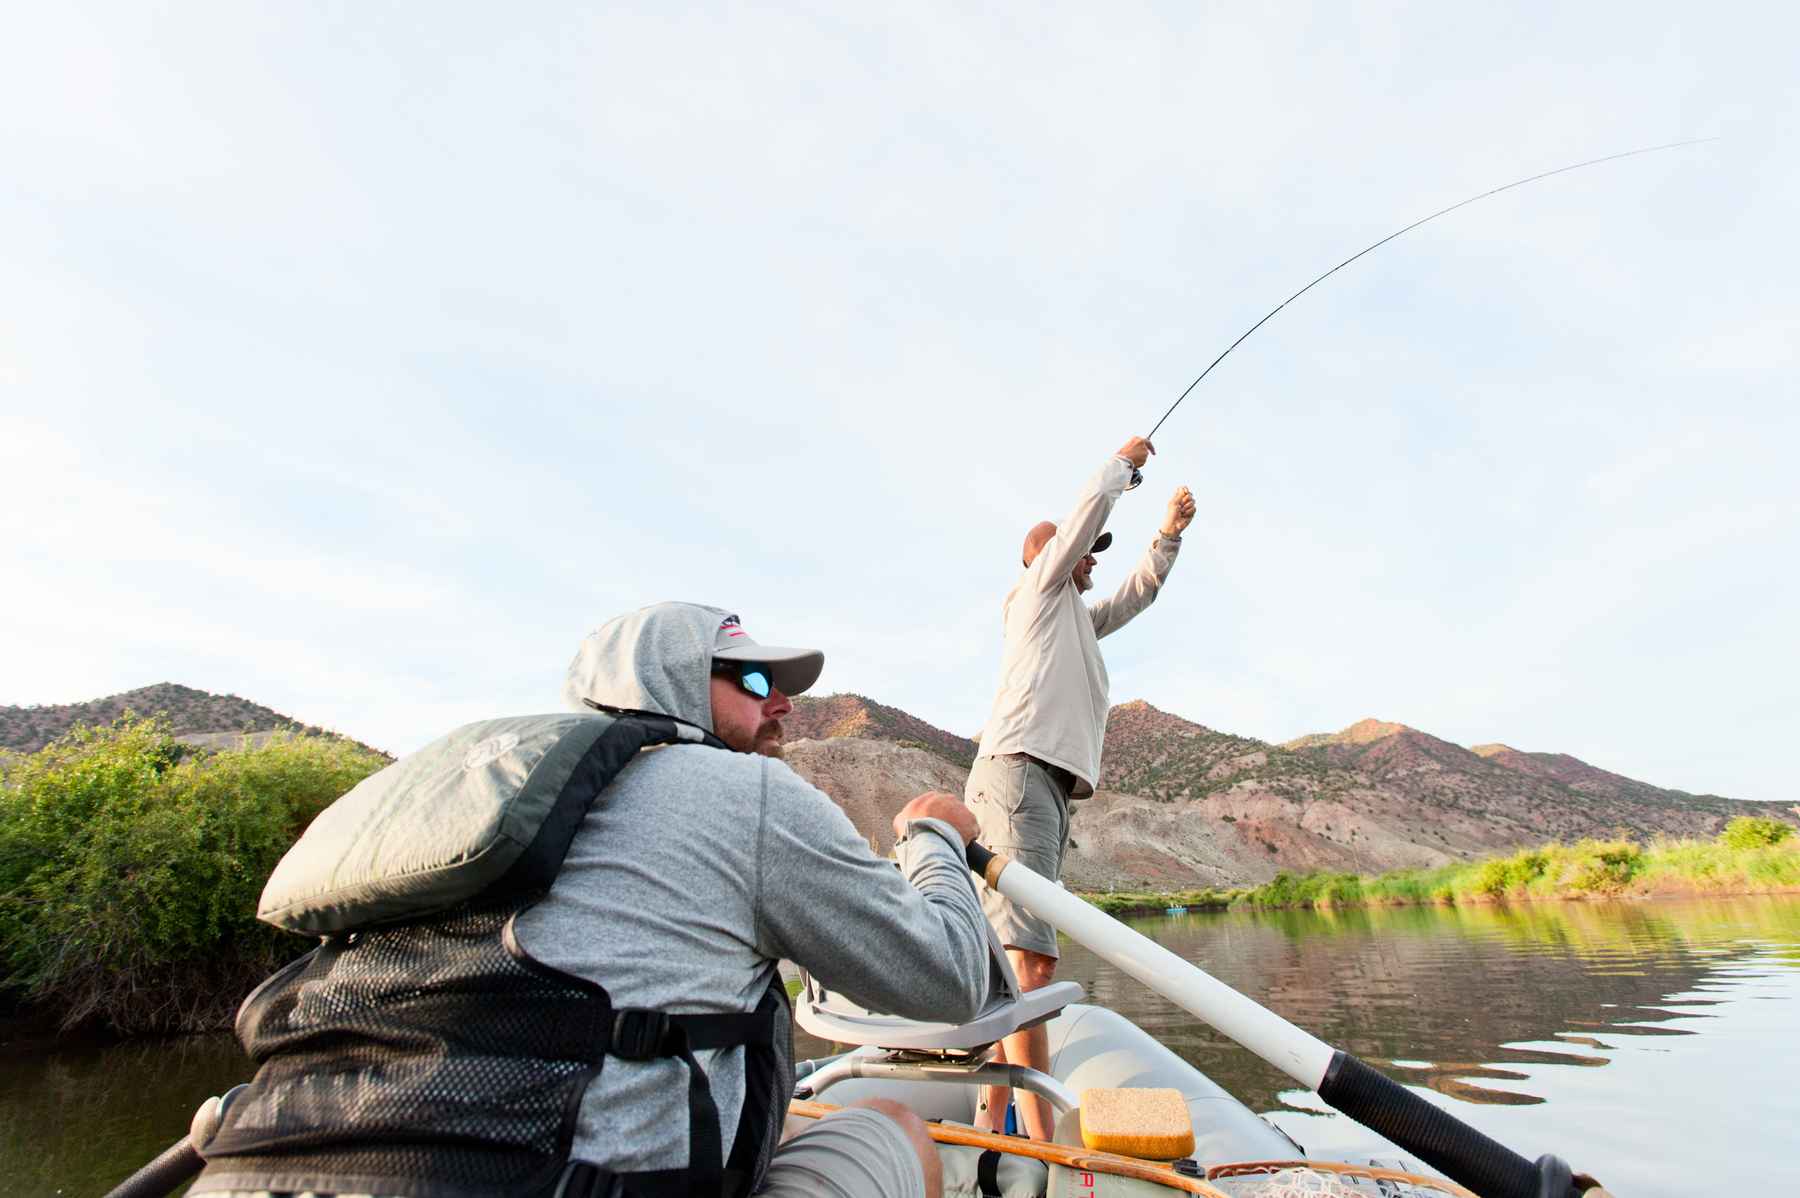 Scott introduces new Session fly rods